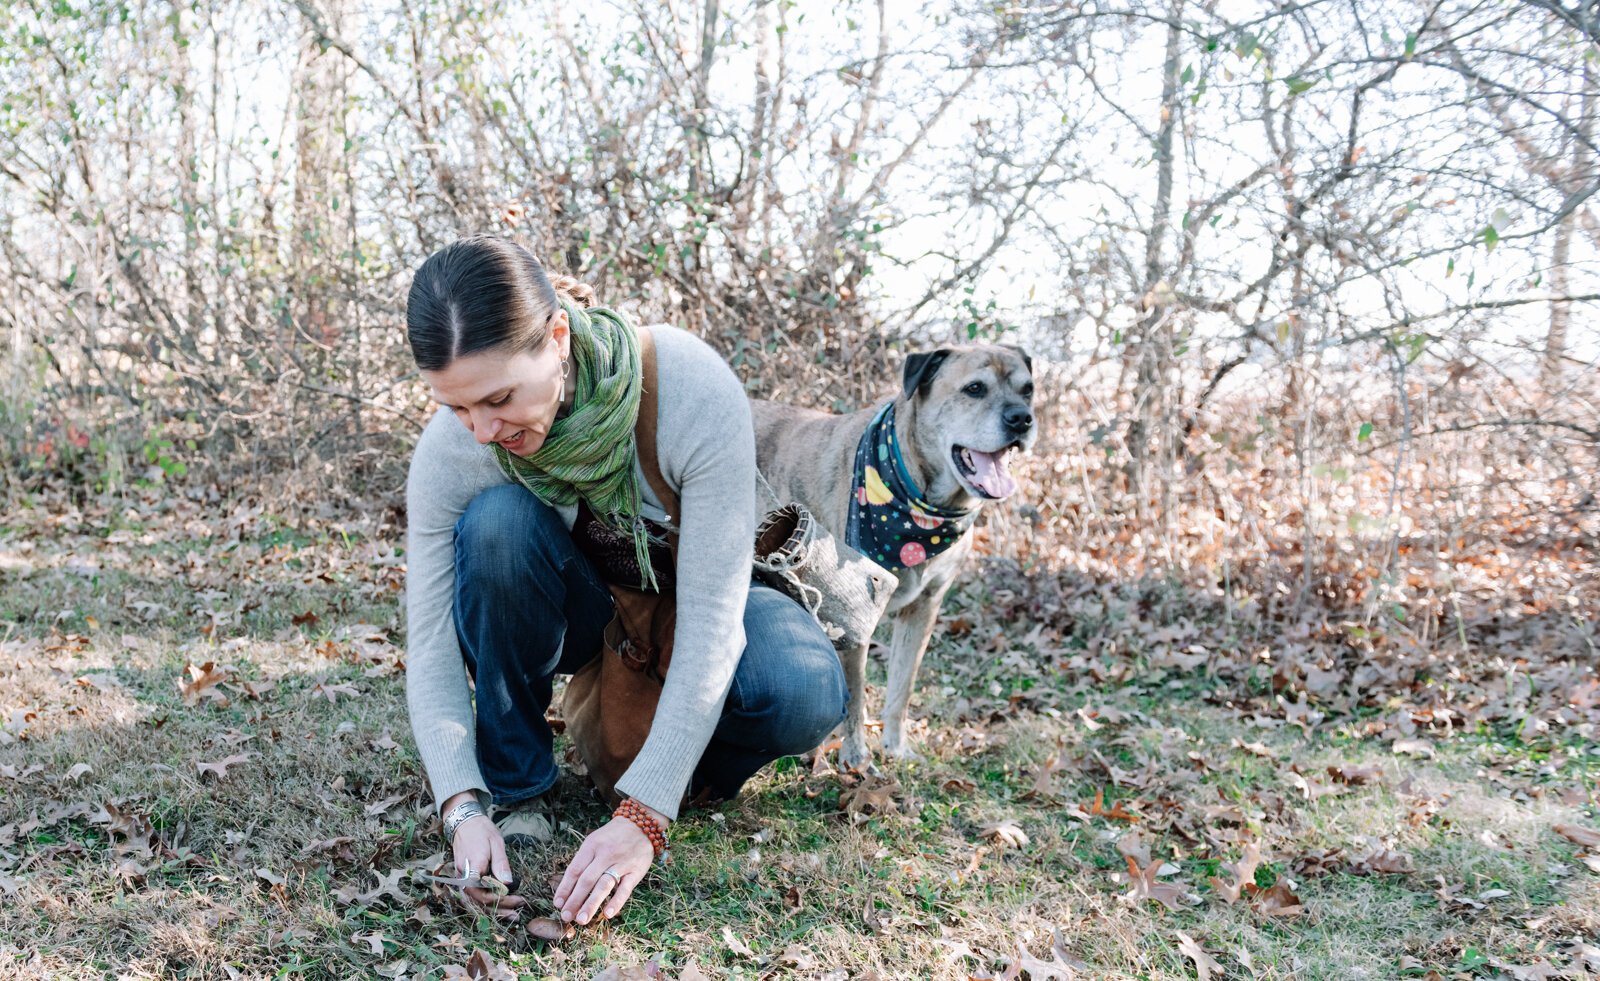 Claudia Hedeen of the Miami Tribe of Oklahoma, forages a mushroom from the genus Suillus with her dog Hobbes on Miami tribal property in Fort Wayne.